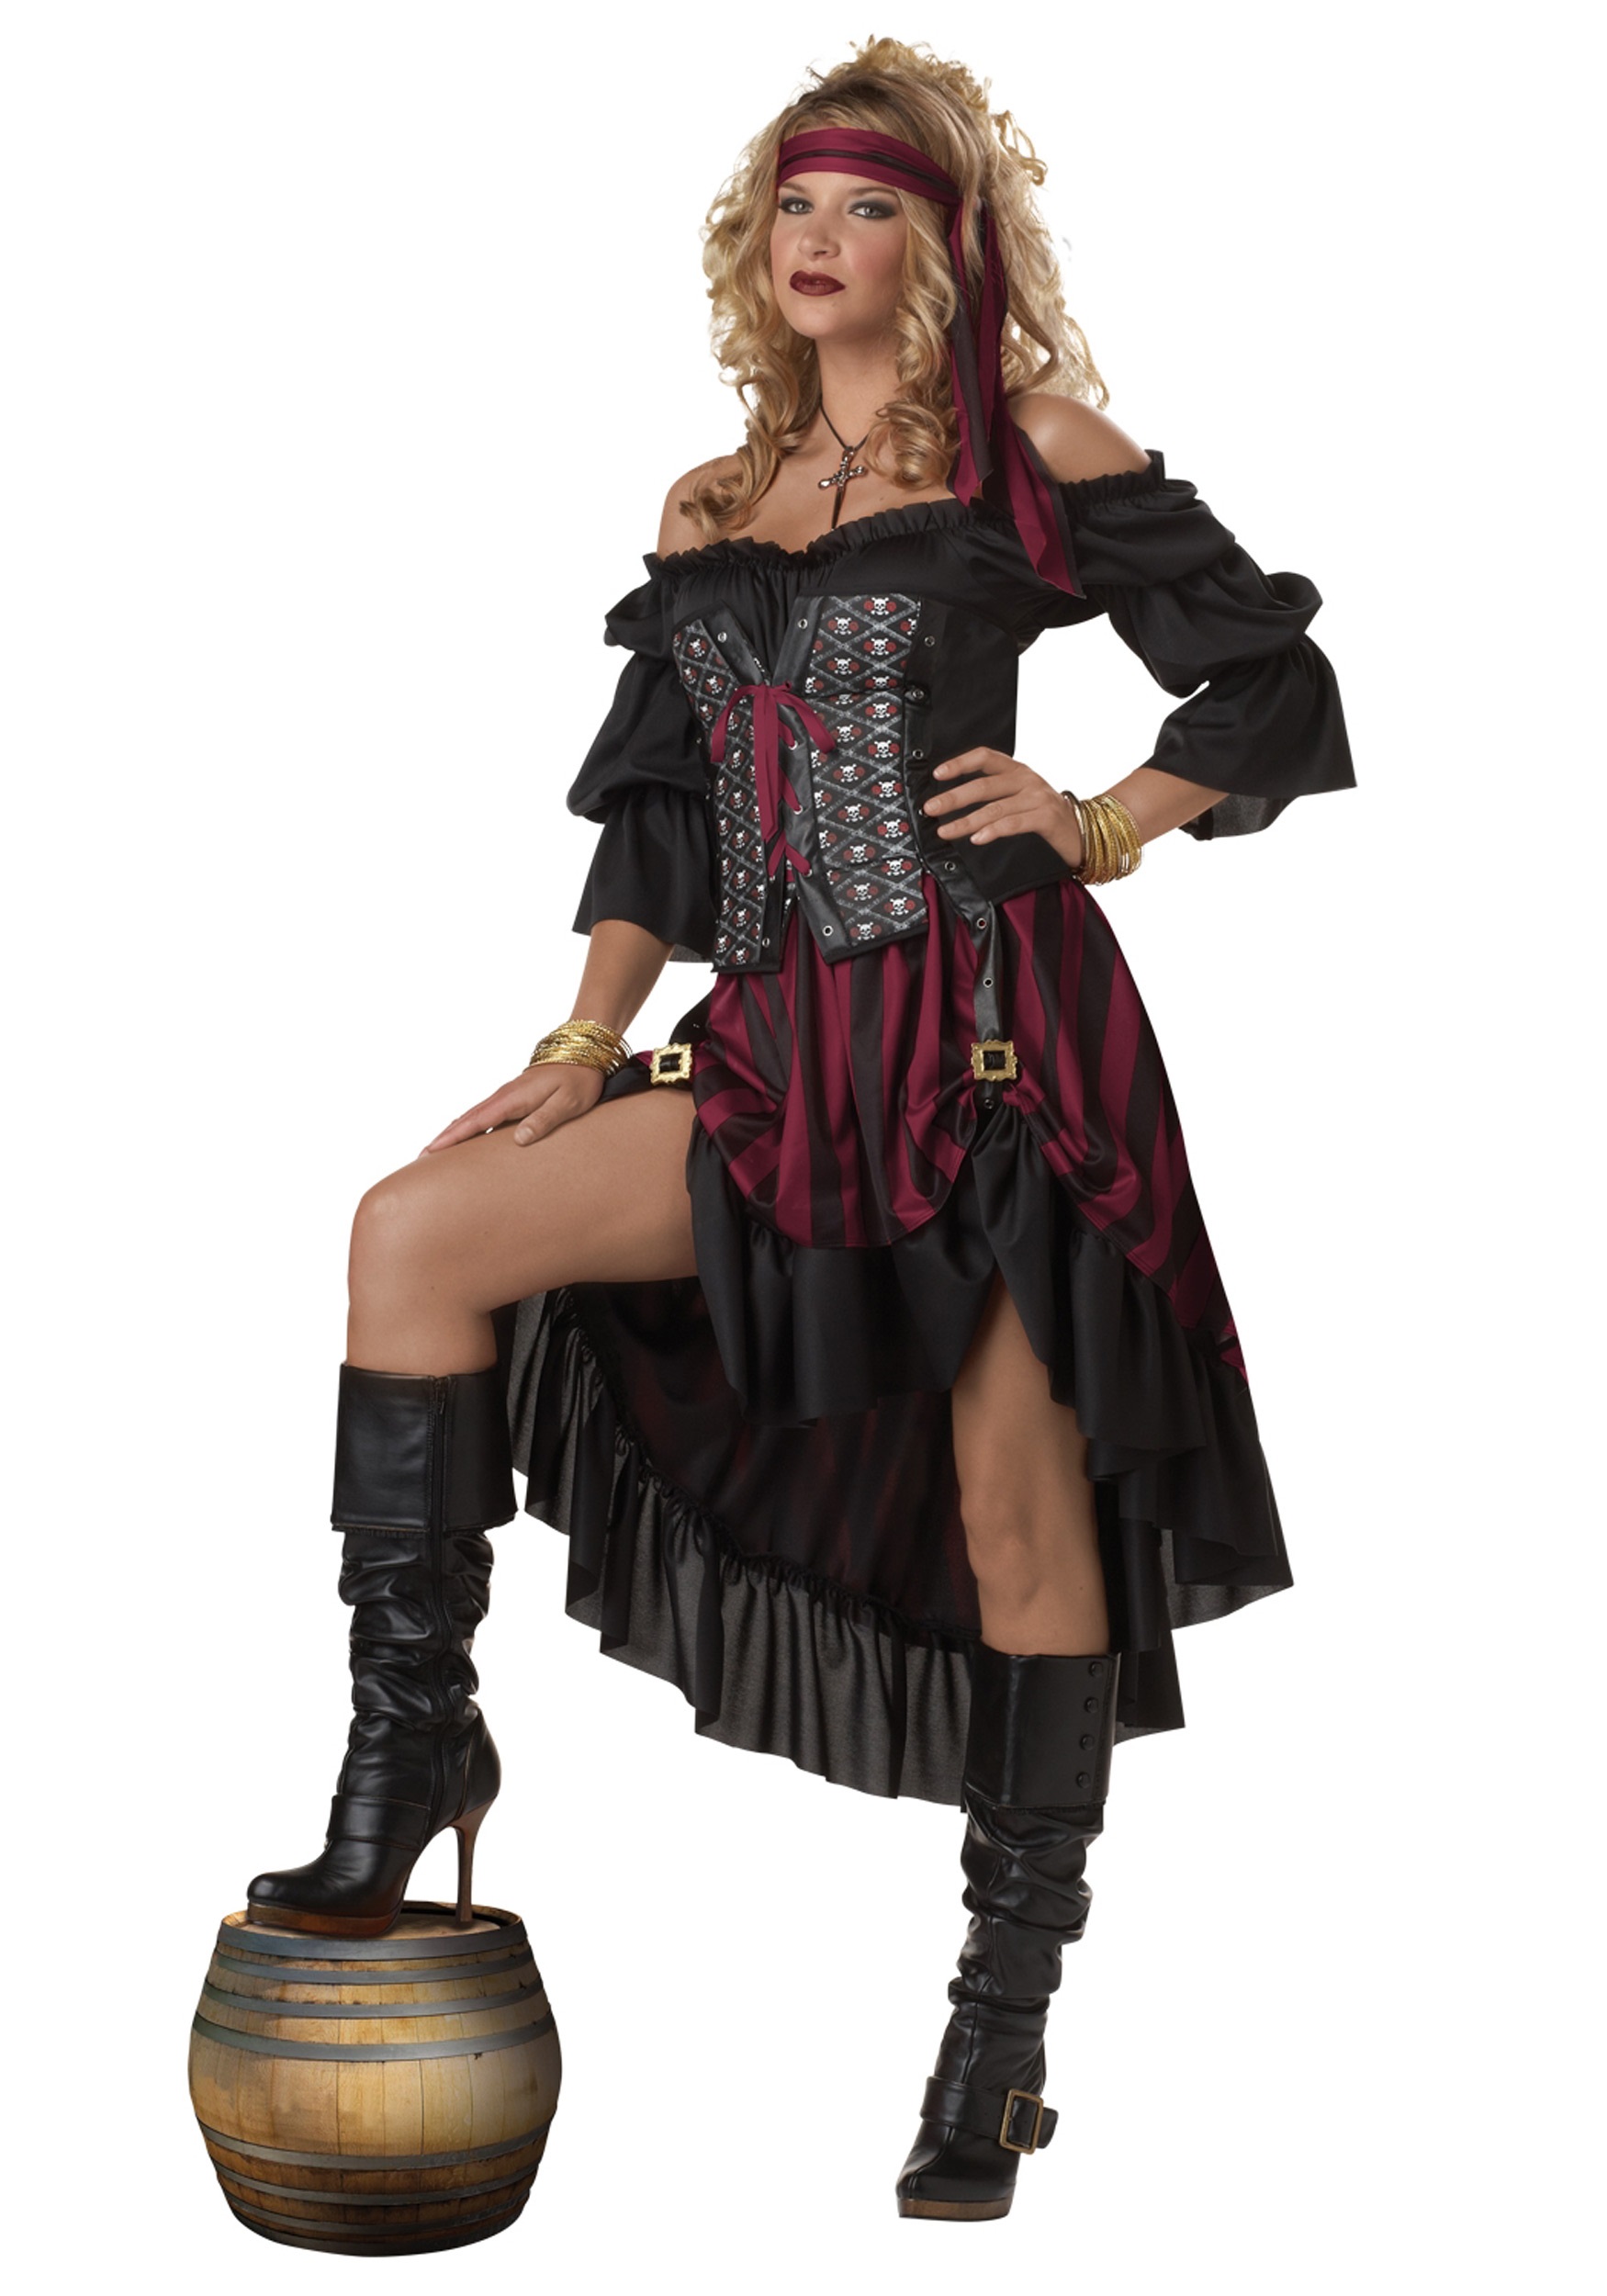 Photos - Fancy Dress California Costume Collection Pirate Wench Costume for Women Black/Red